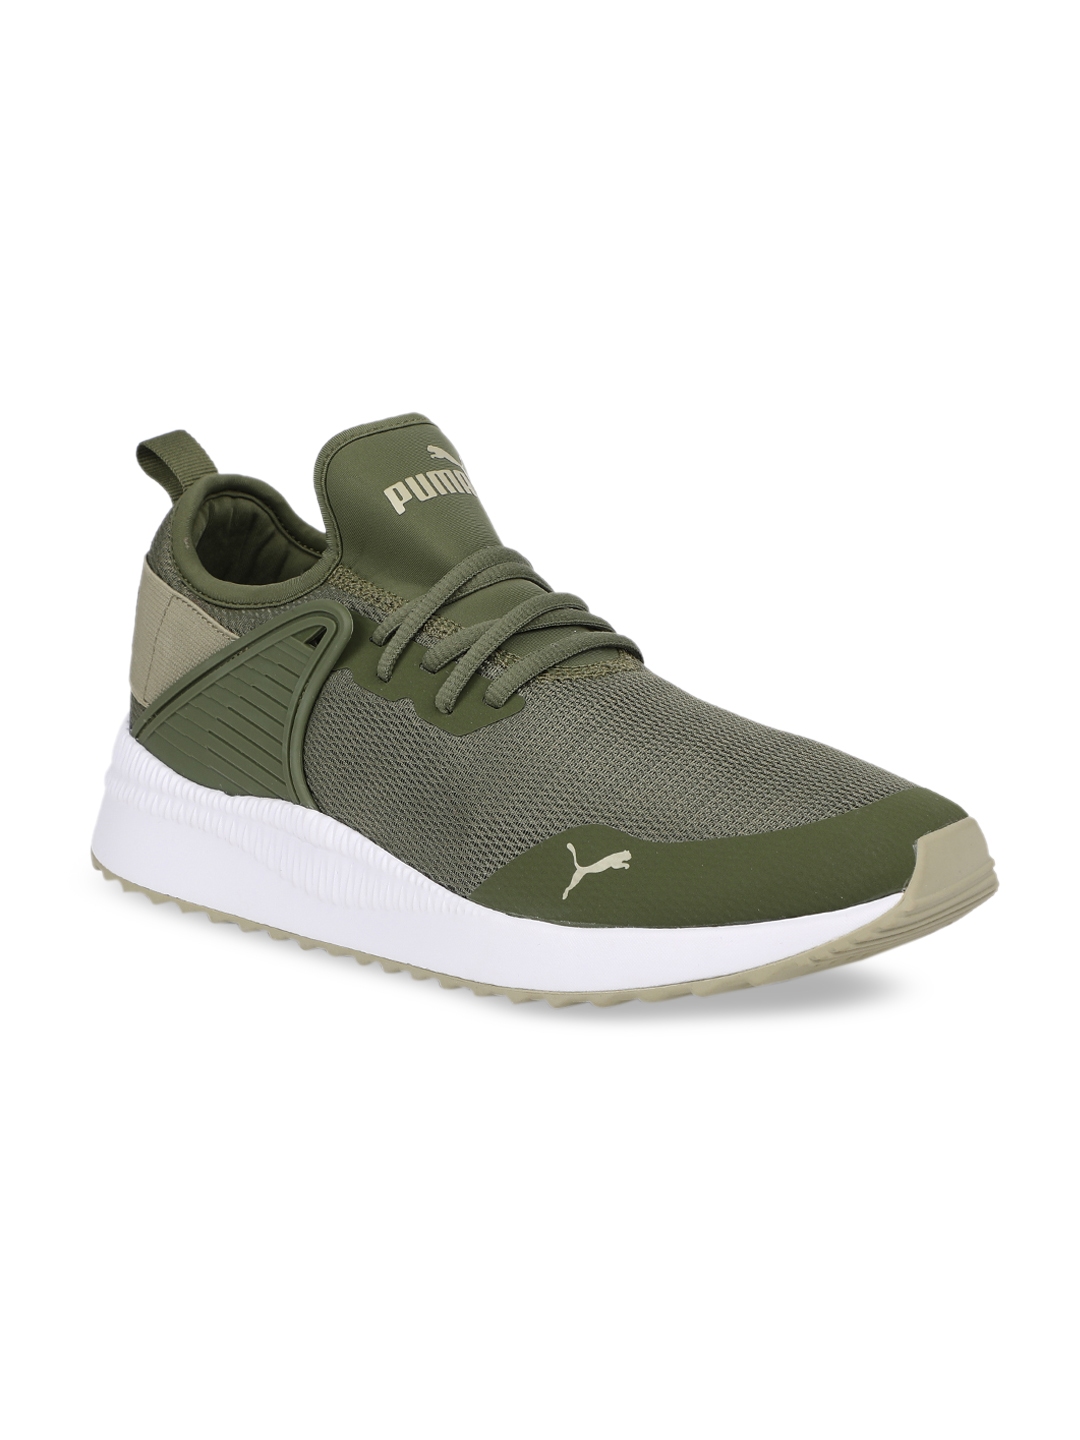 Buy Puma Men Olive Green Sneakers - Casual Shoes for Men 8757973 | Myntra